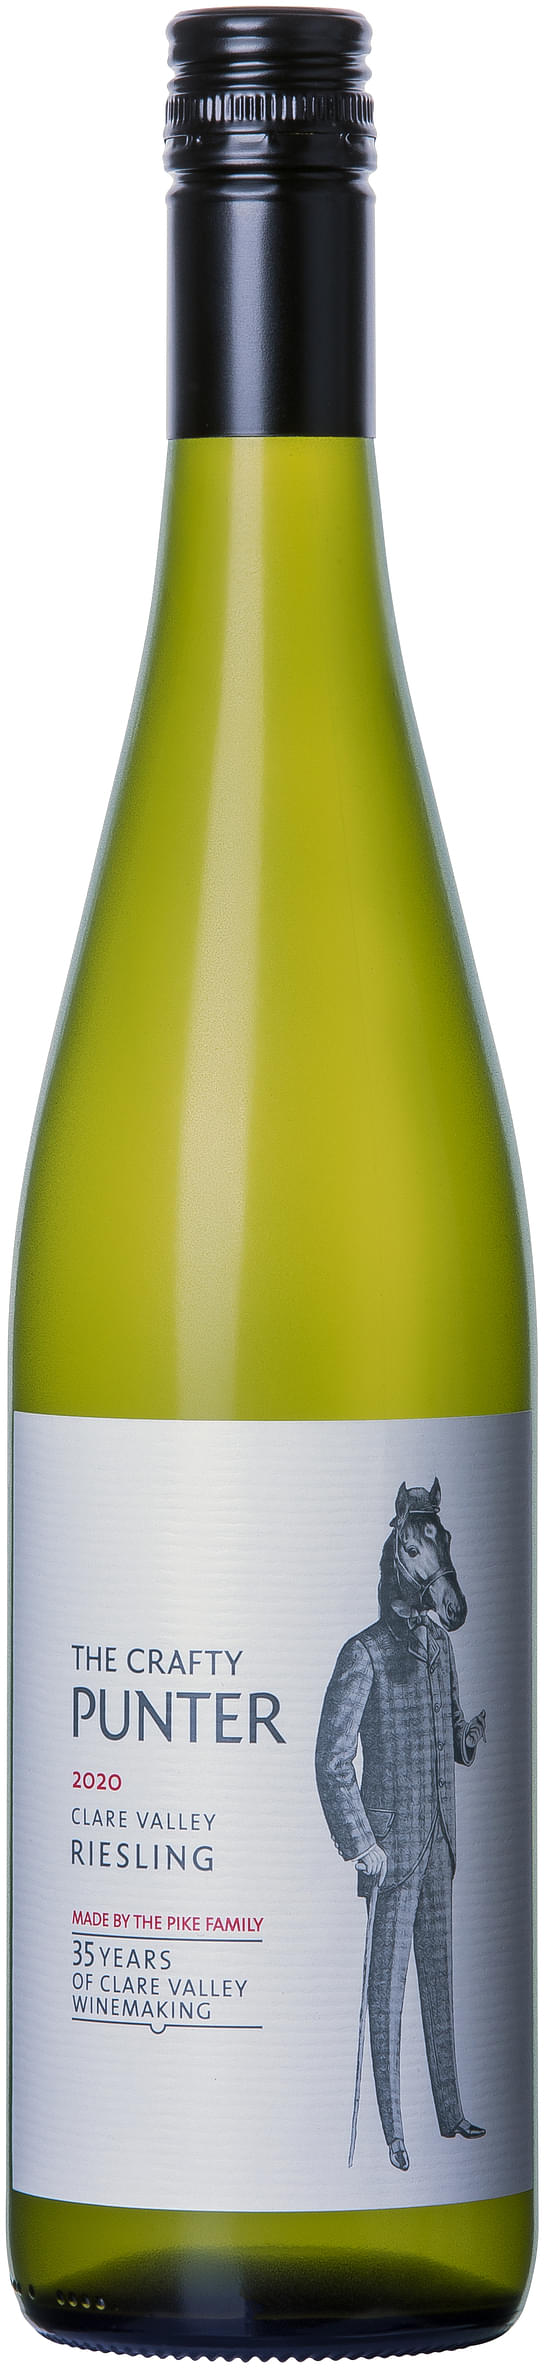 The Crafty Punter Clare Valley Riesling